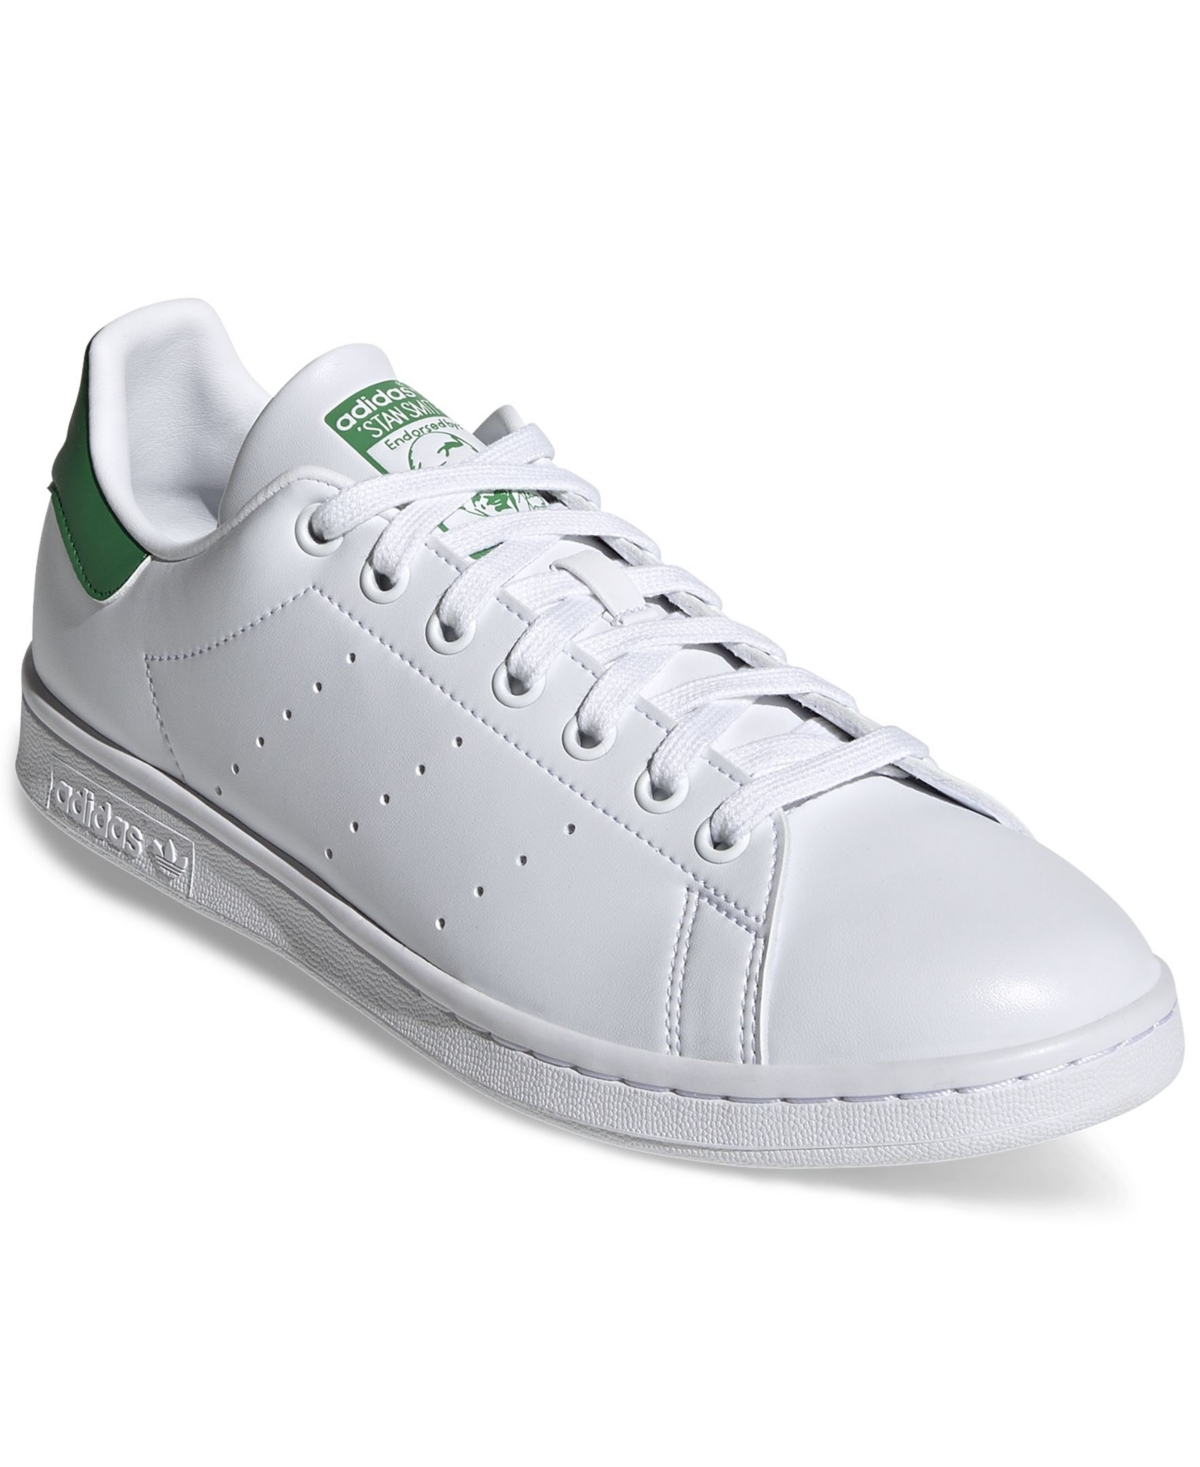 adidas Men's Originals Stan Smith Primegreen Casual Sneakers from Macy's